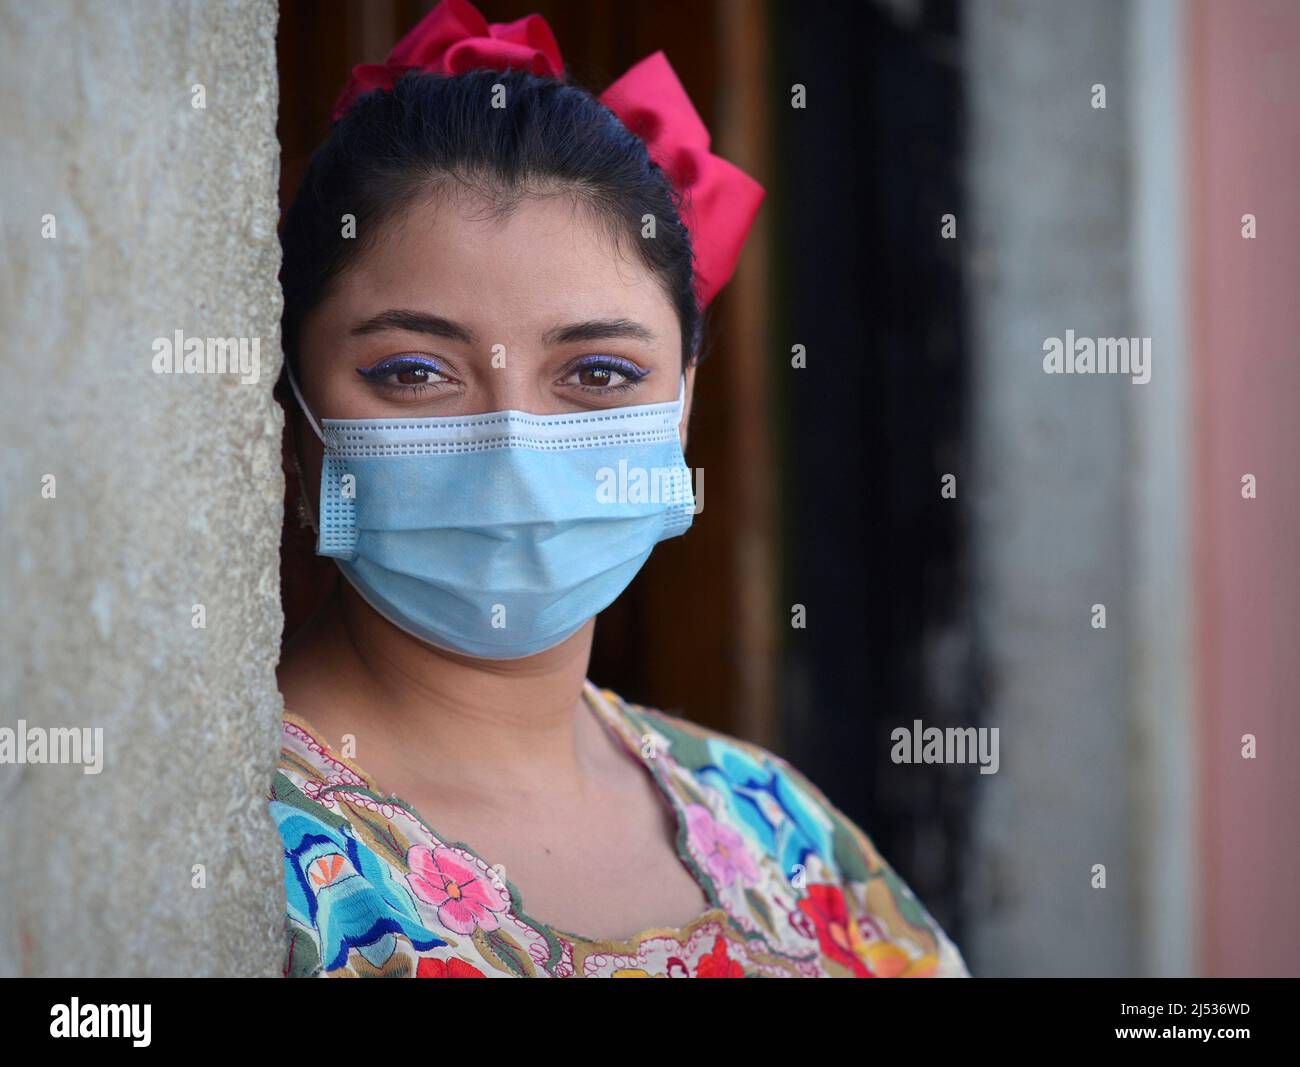 Positive young Mexican woman with smiling eyes and blue eye makeup wears a colorful traditional Yucatan Maya dress and light-blue surgical face mask. Stock Photo